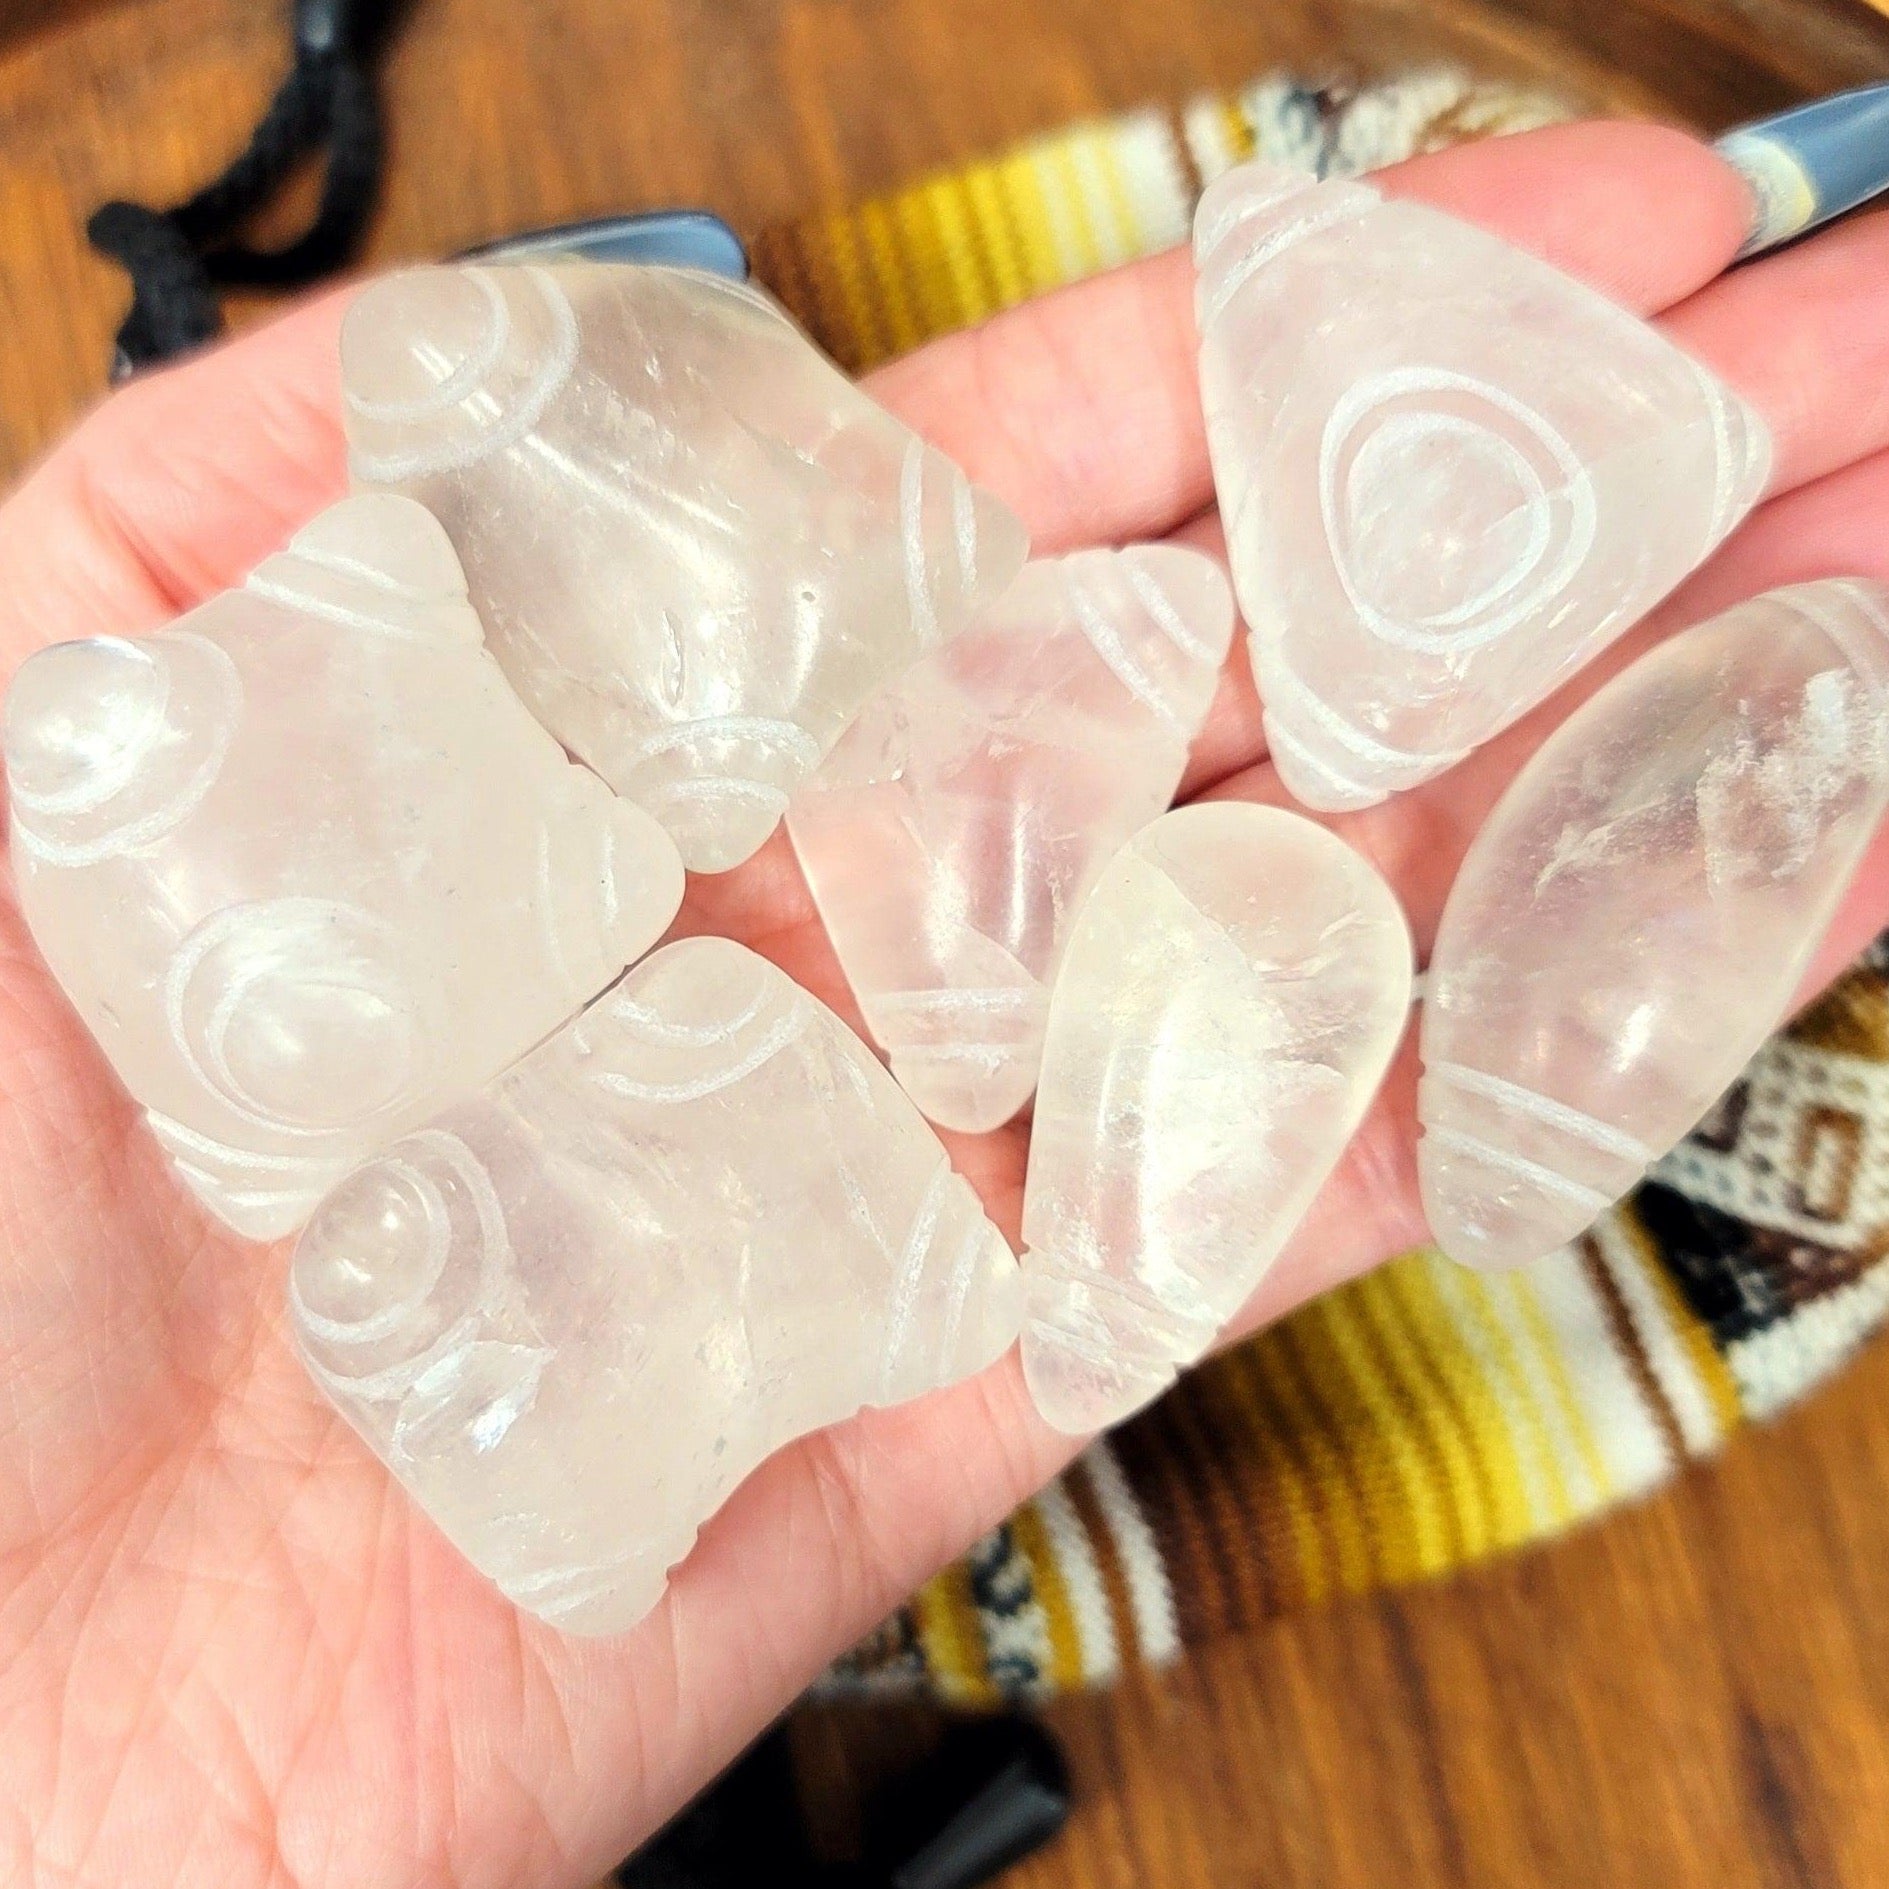 Clear Quartz Chumpi Stones for Ancestral Lineage Work and Shamaic Journey